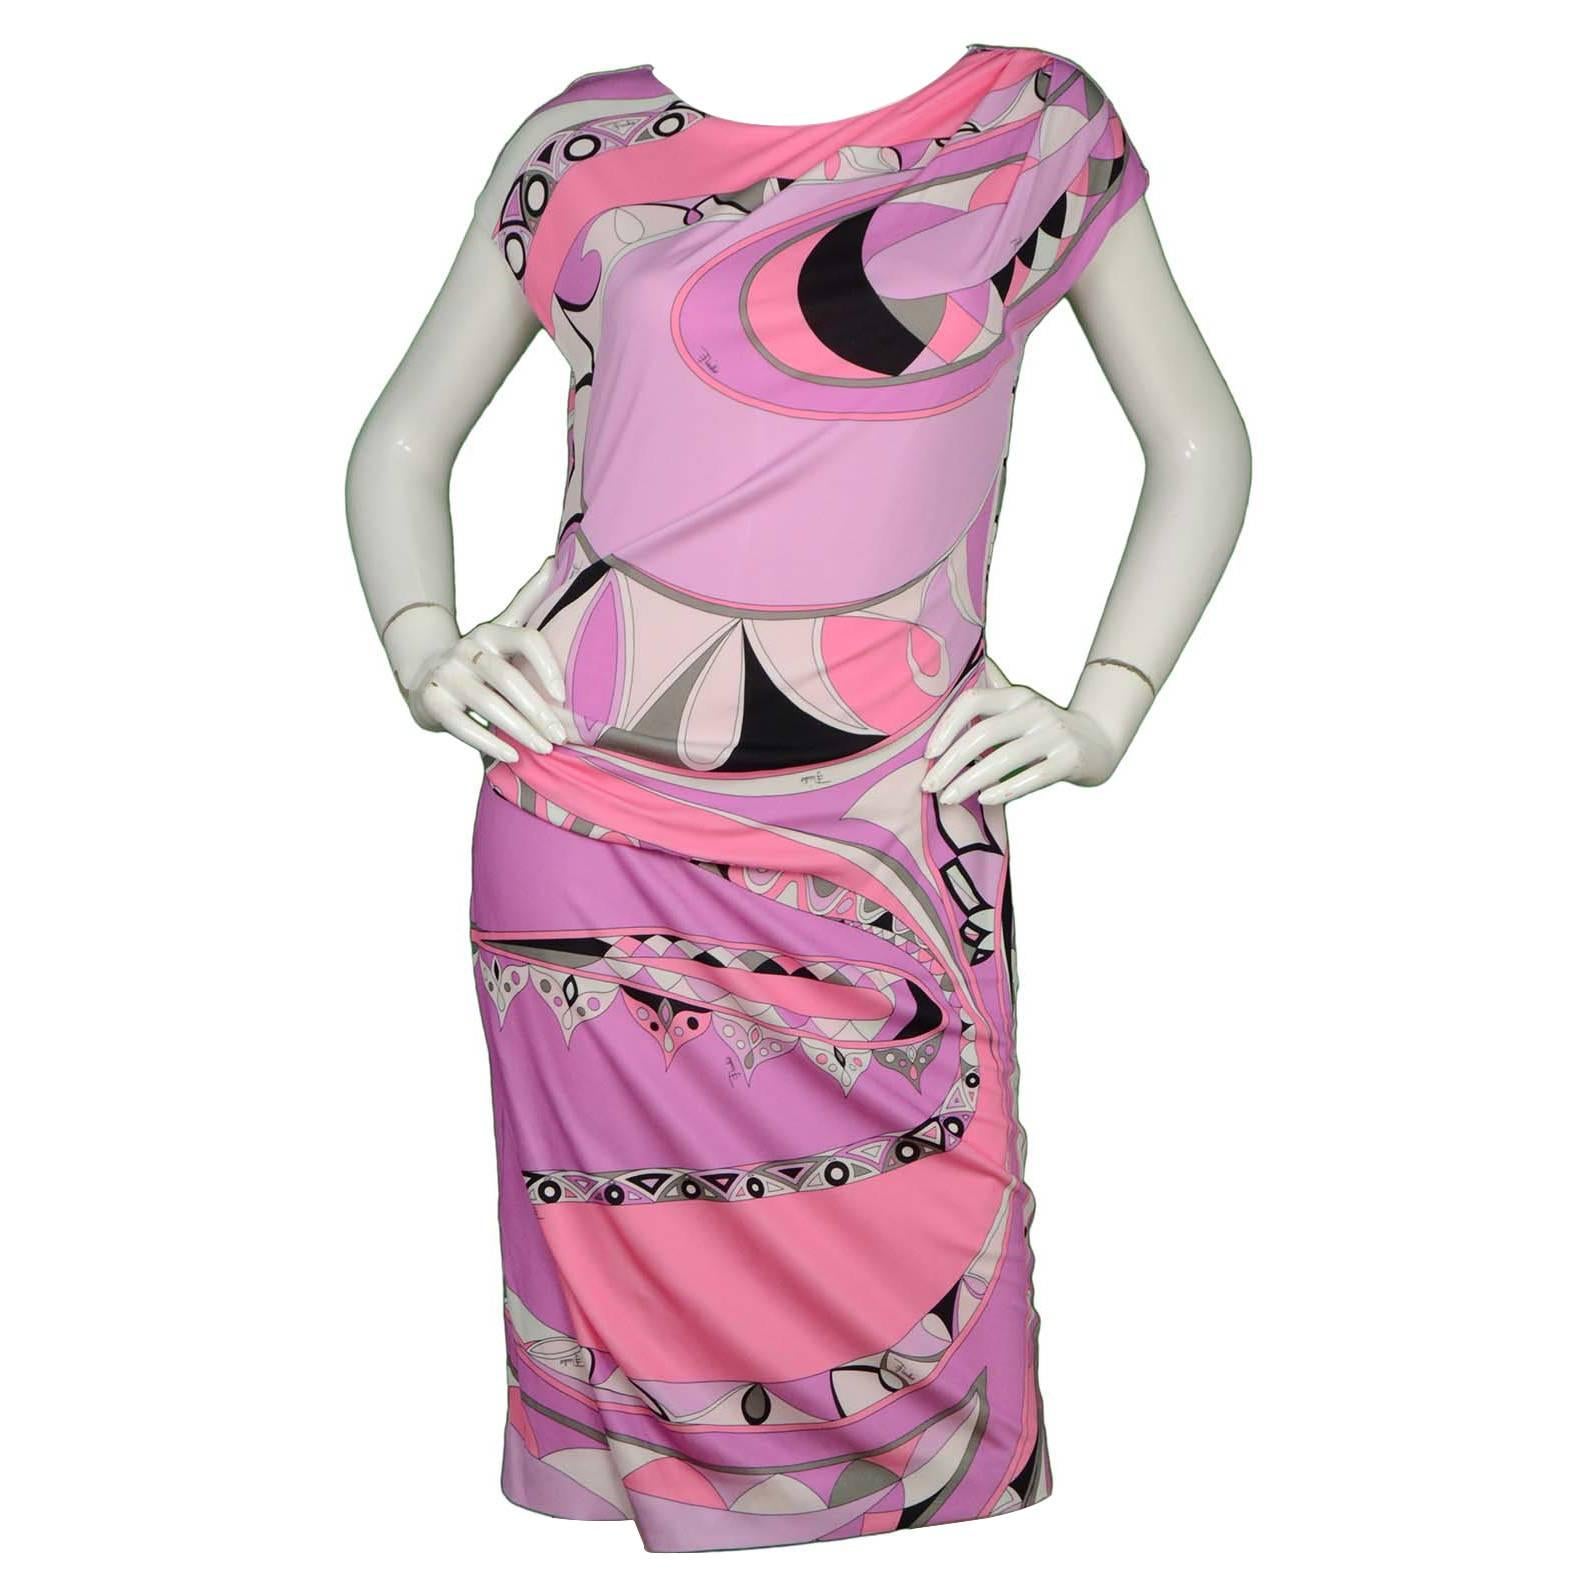 Emilio Pucci Pink and Lavender Printed Dress Sz 10